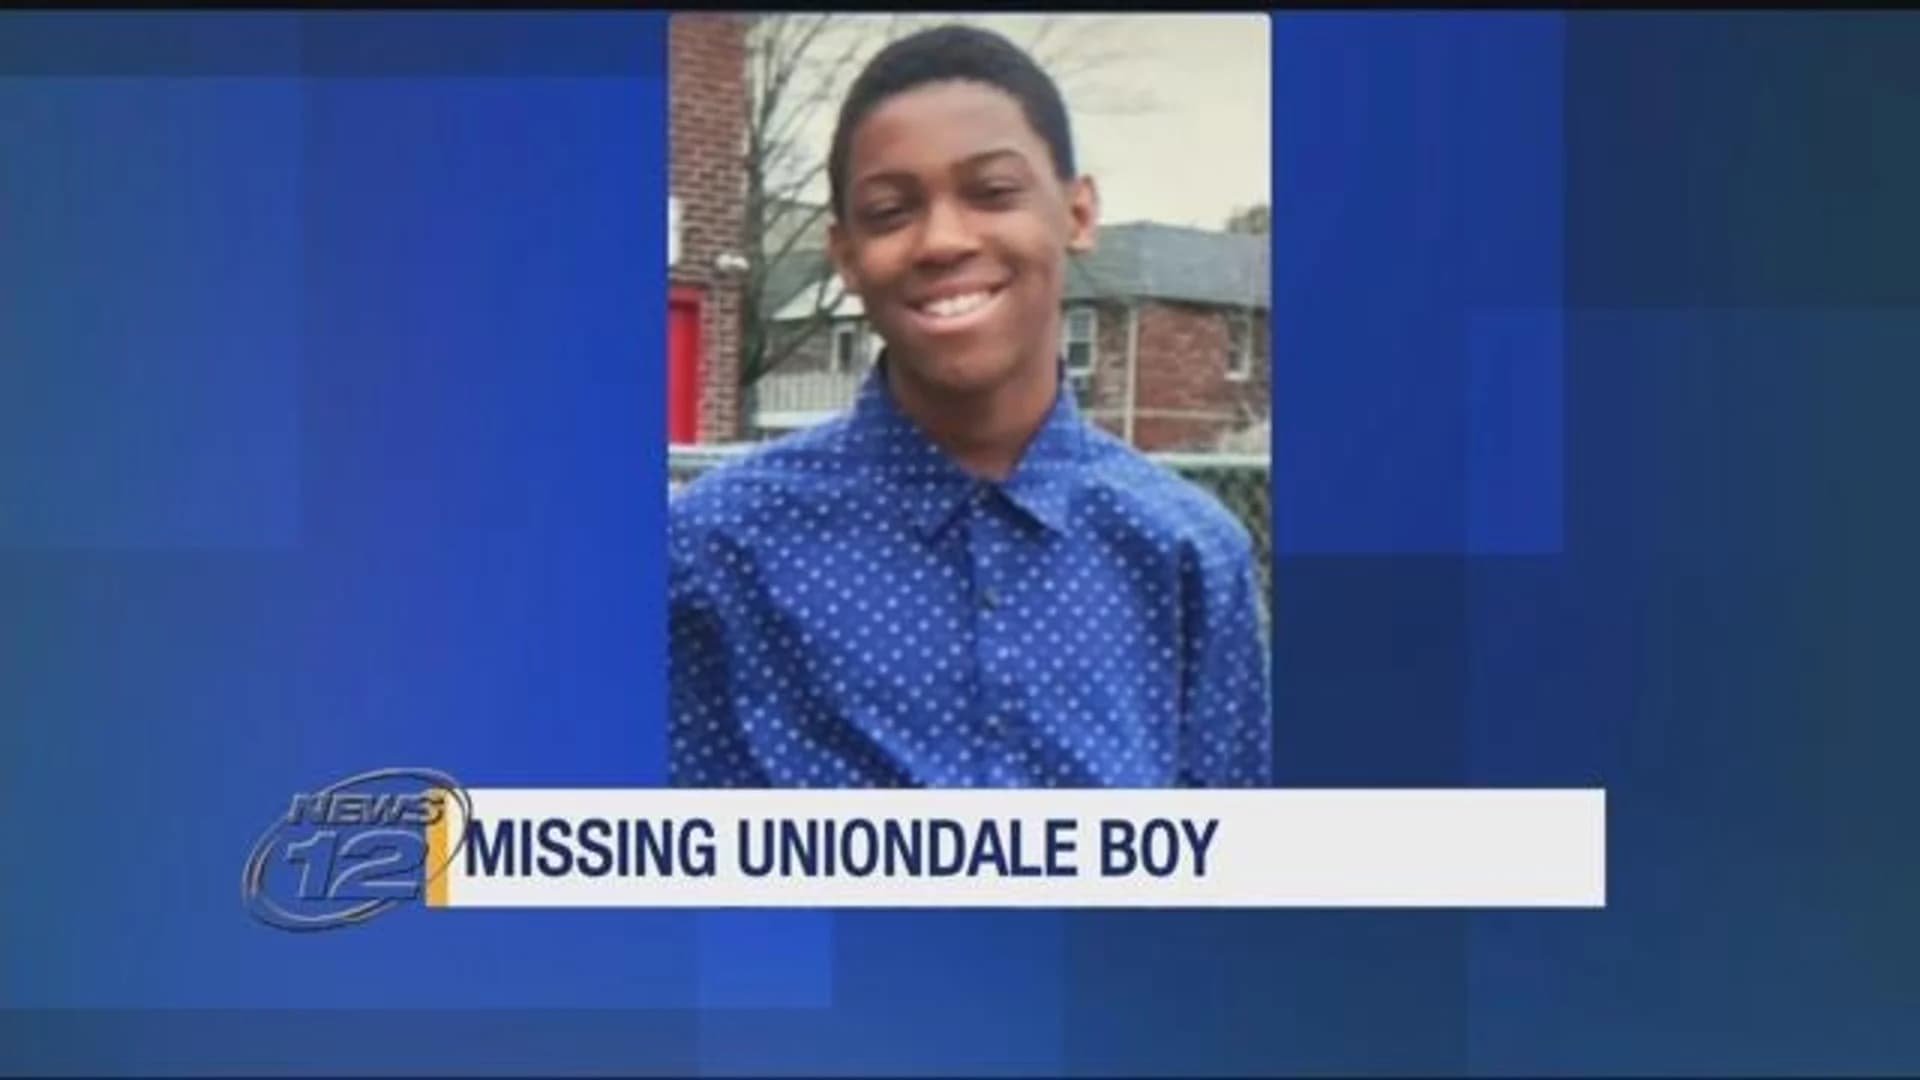 Search underway for missing 12-year-old from Uniondale